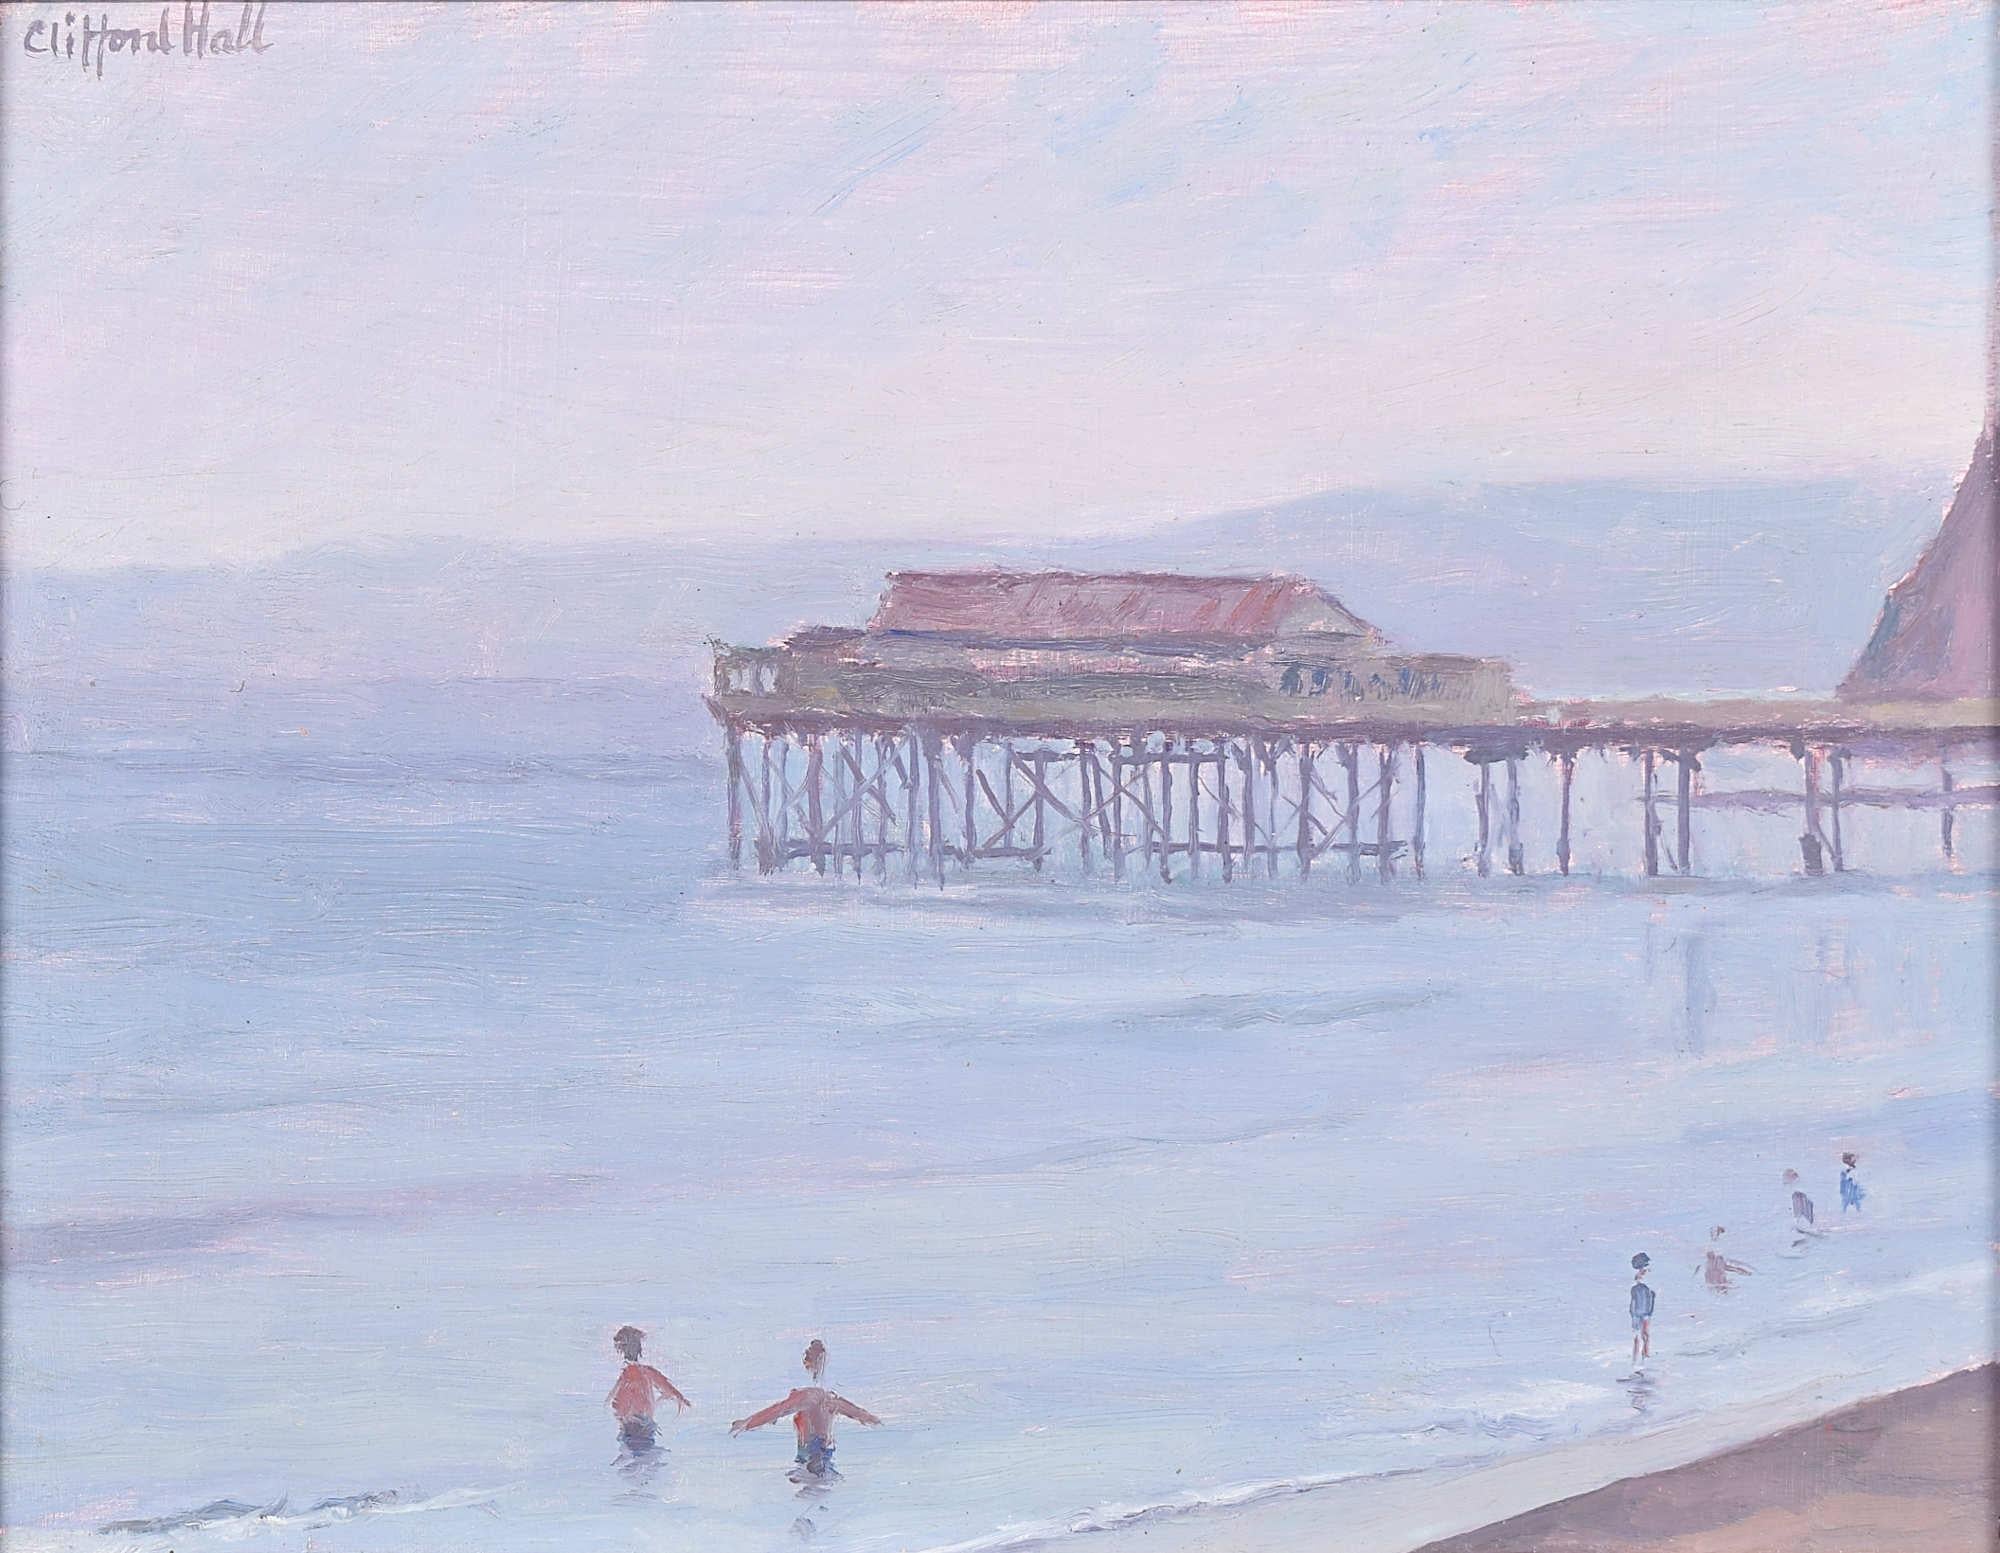 Clifford Hall Teignmouth Pier and Beach oil painting Modern British Art seaside